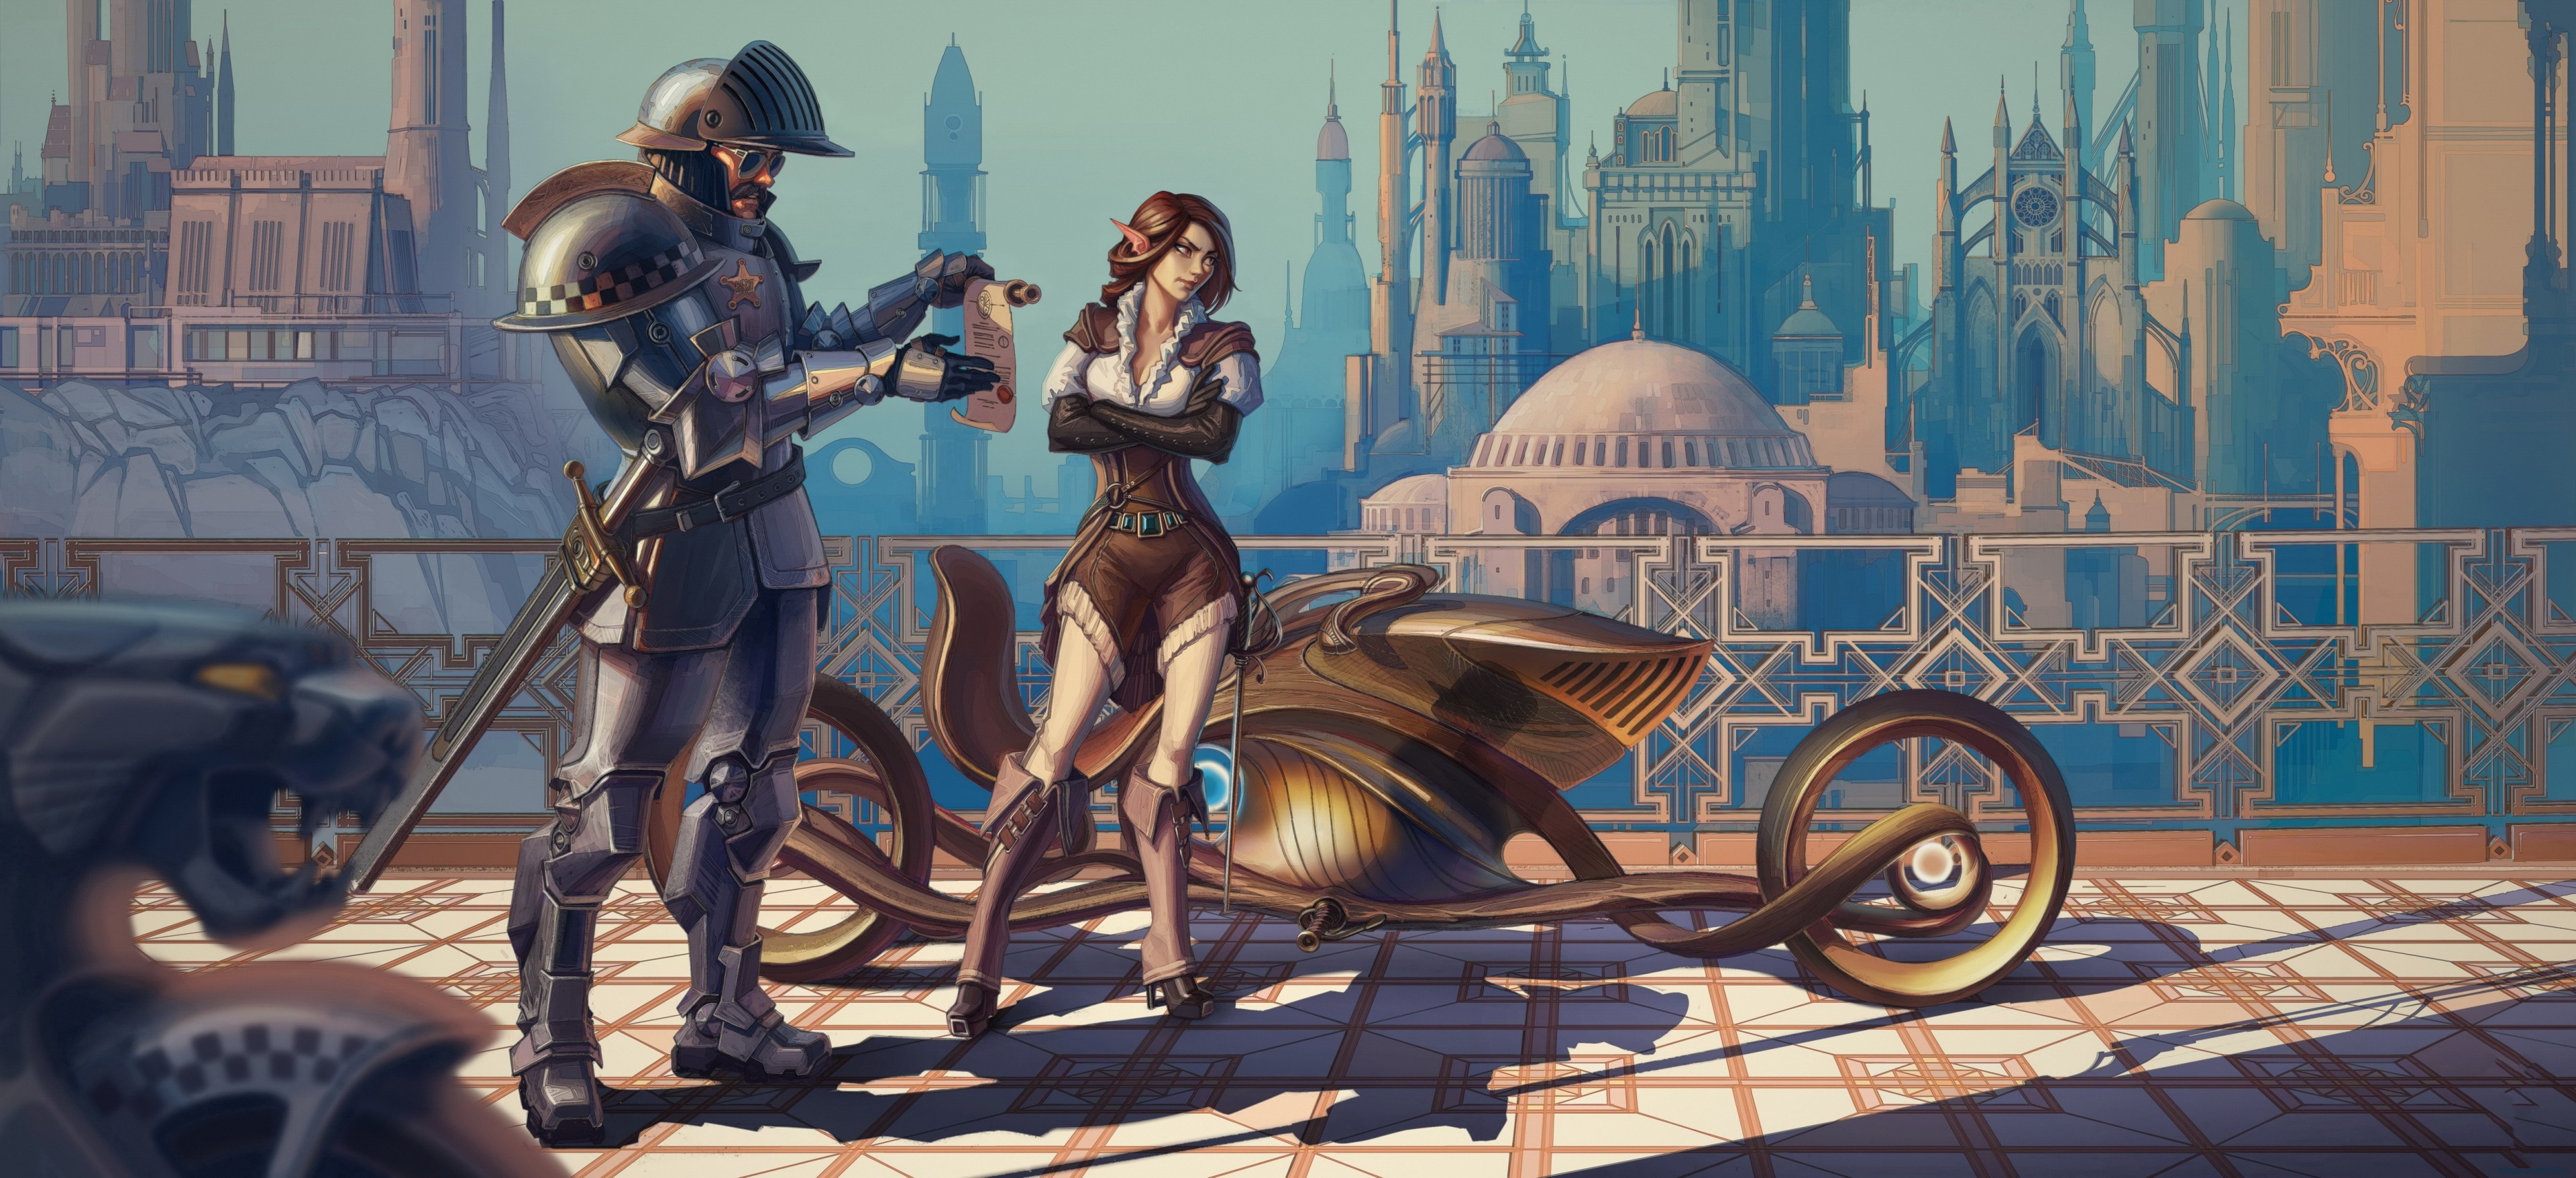 3840x1756 steampunk 4k free download for pc Gallery HD Wallpaper